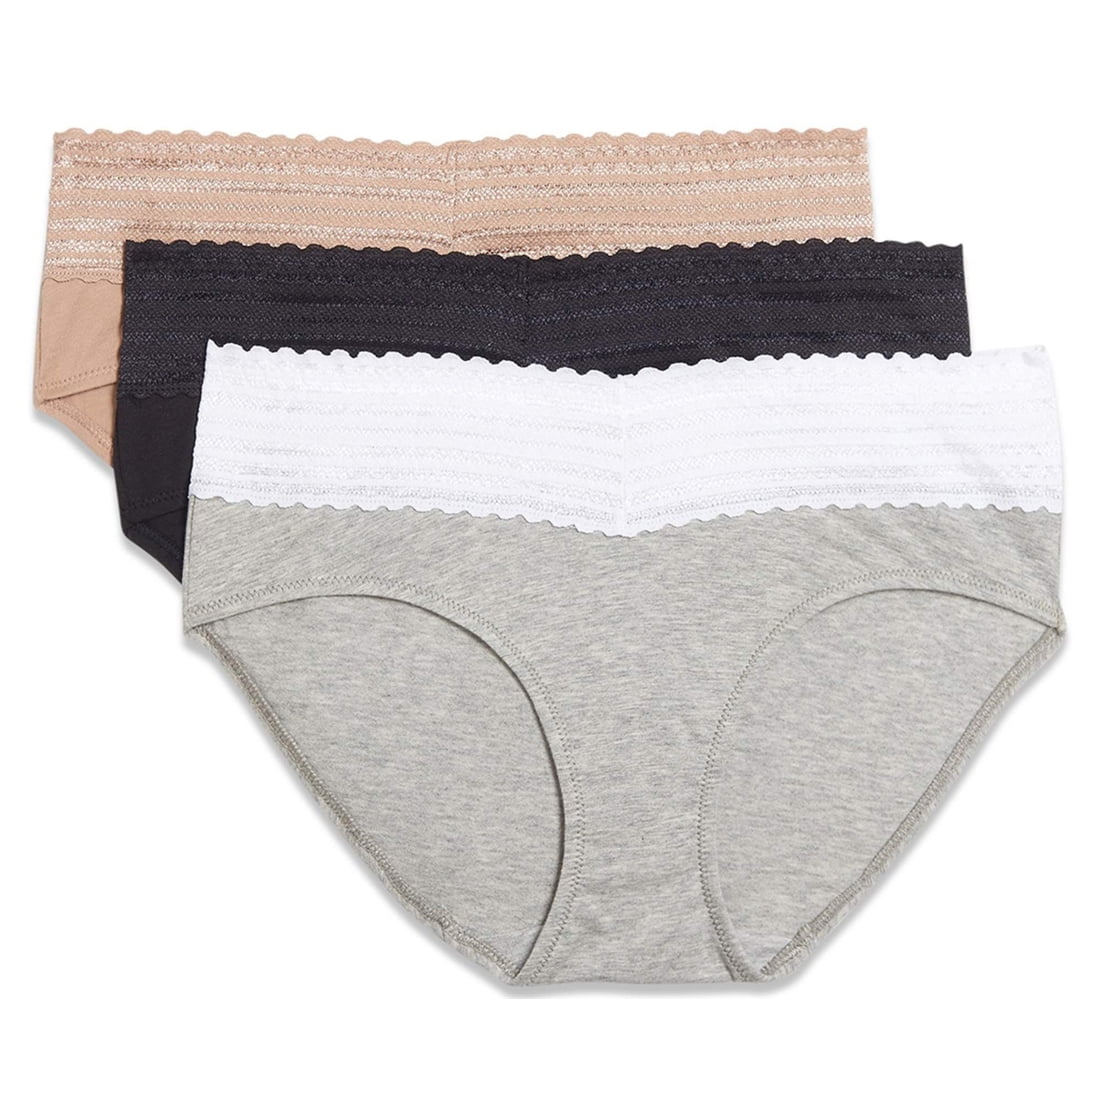 Warner's No Pinch 3 Pack Cotton Hipster Lace Panties - Discount